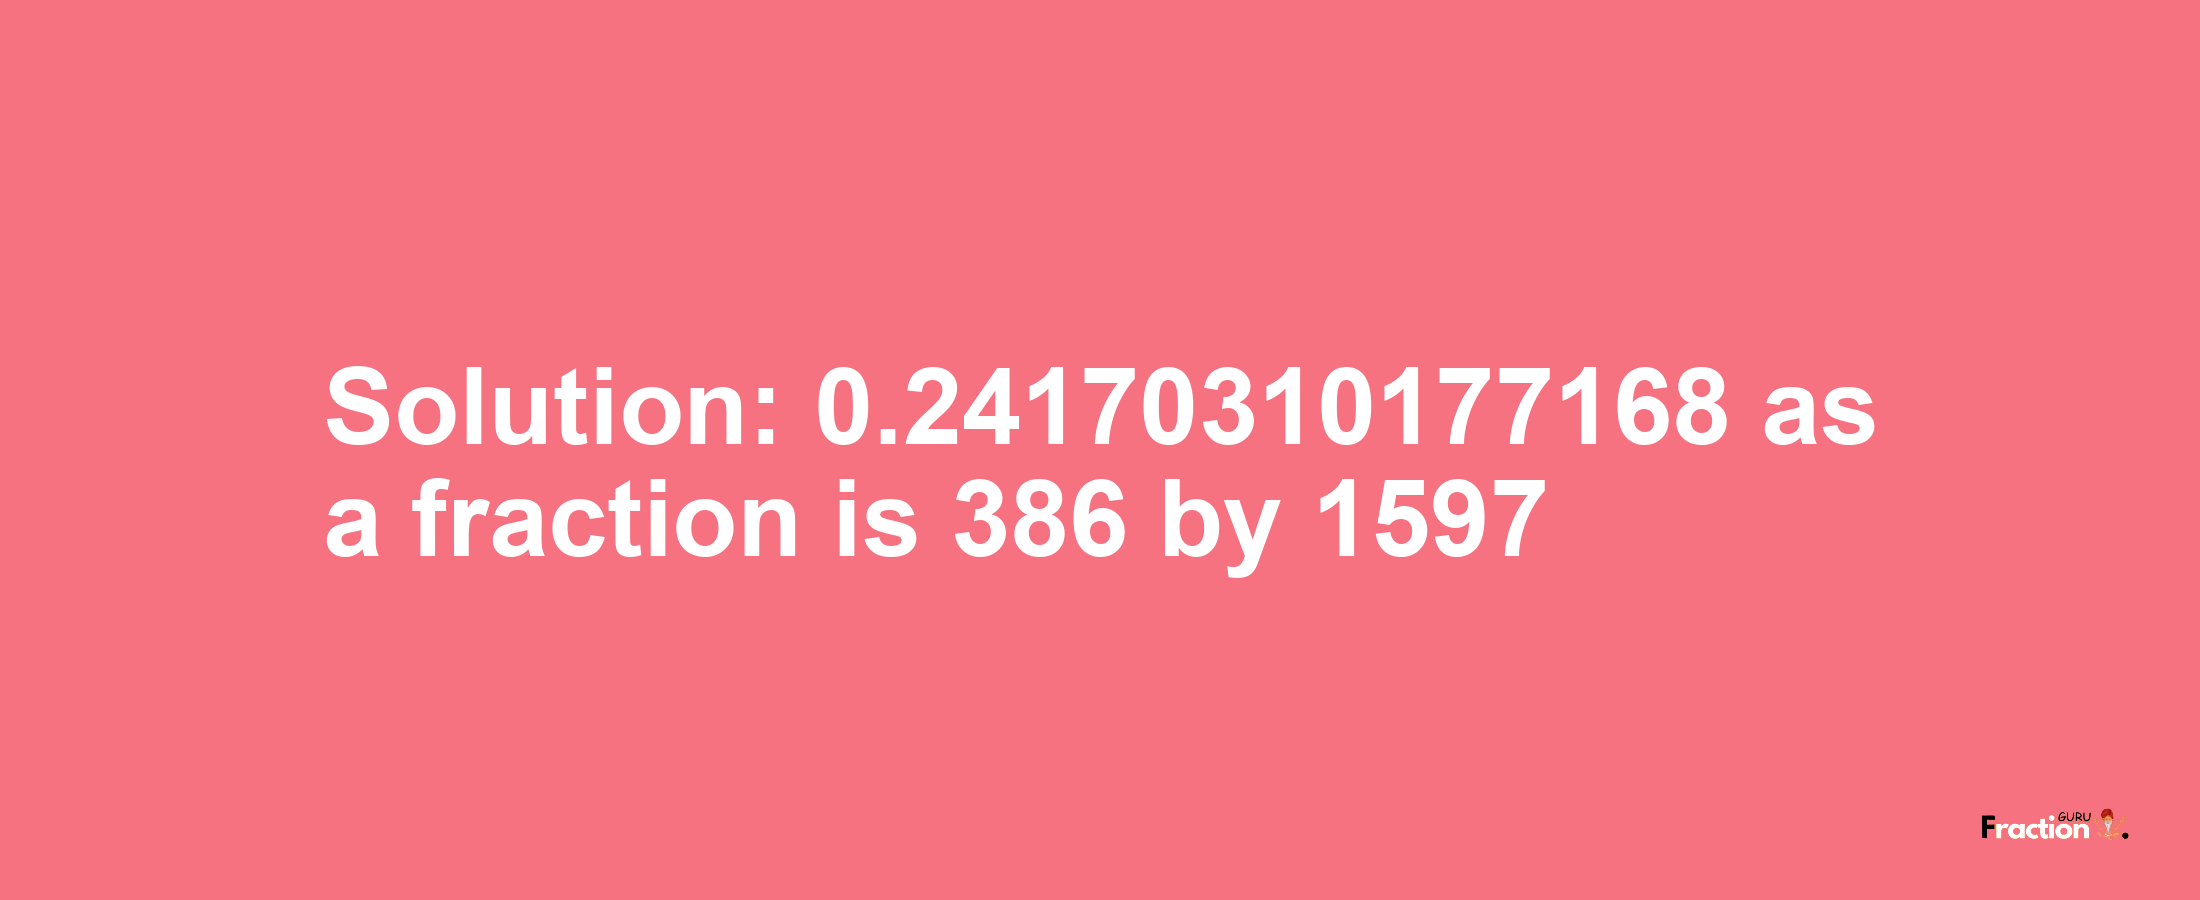 Solution:0.24170310177168 as a fraction is 386/1597